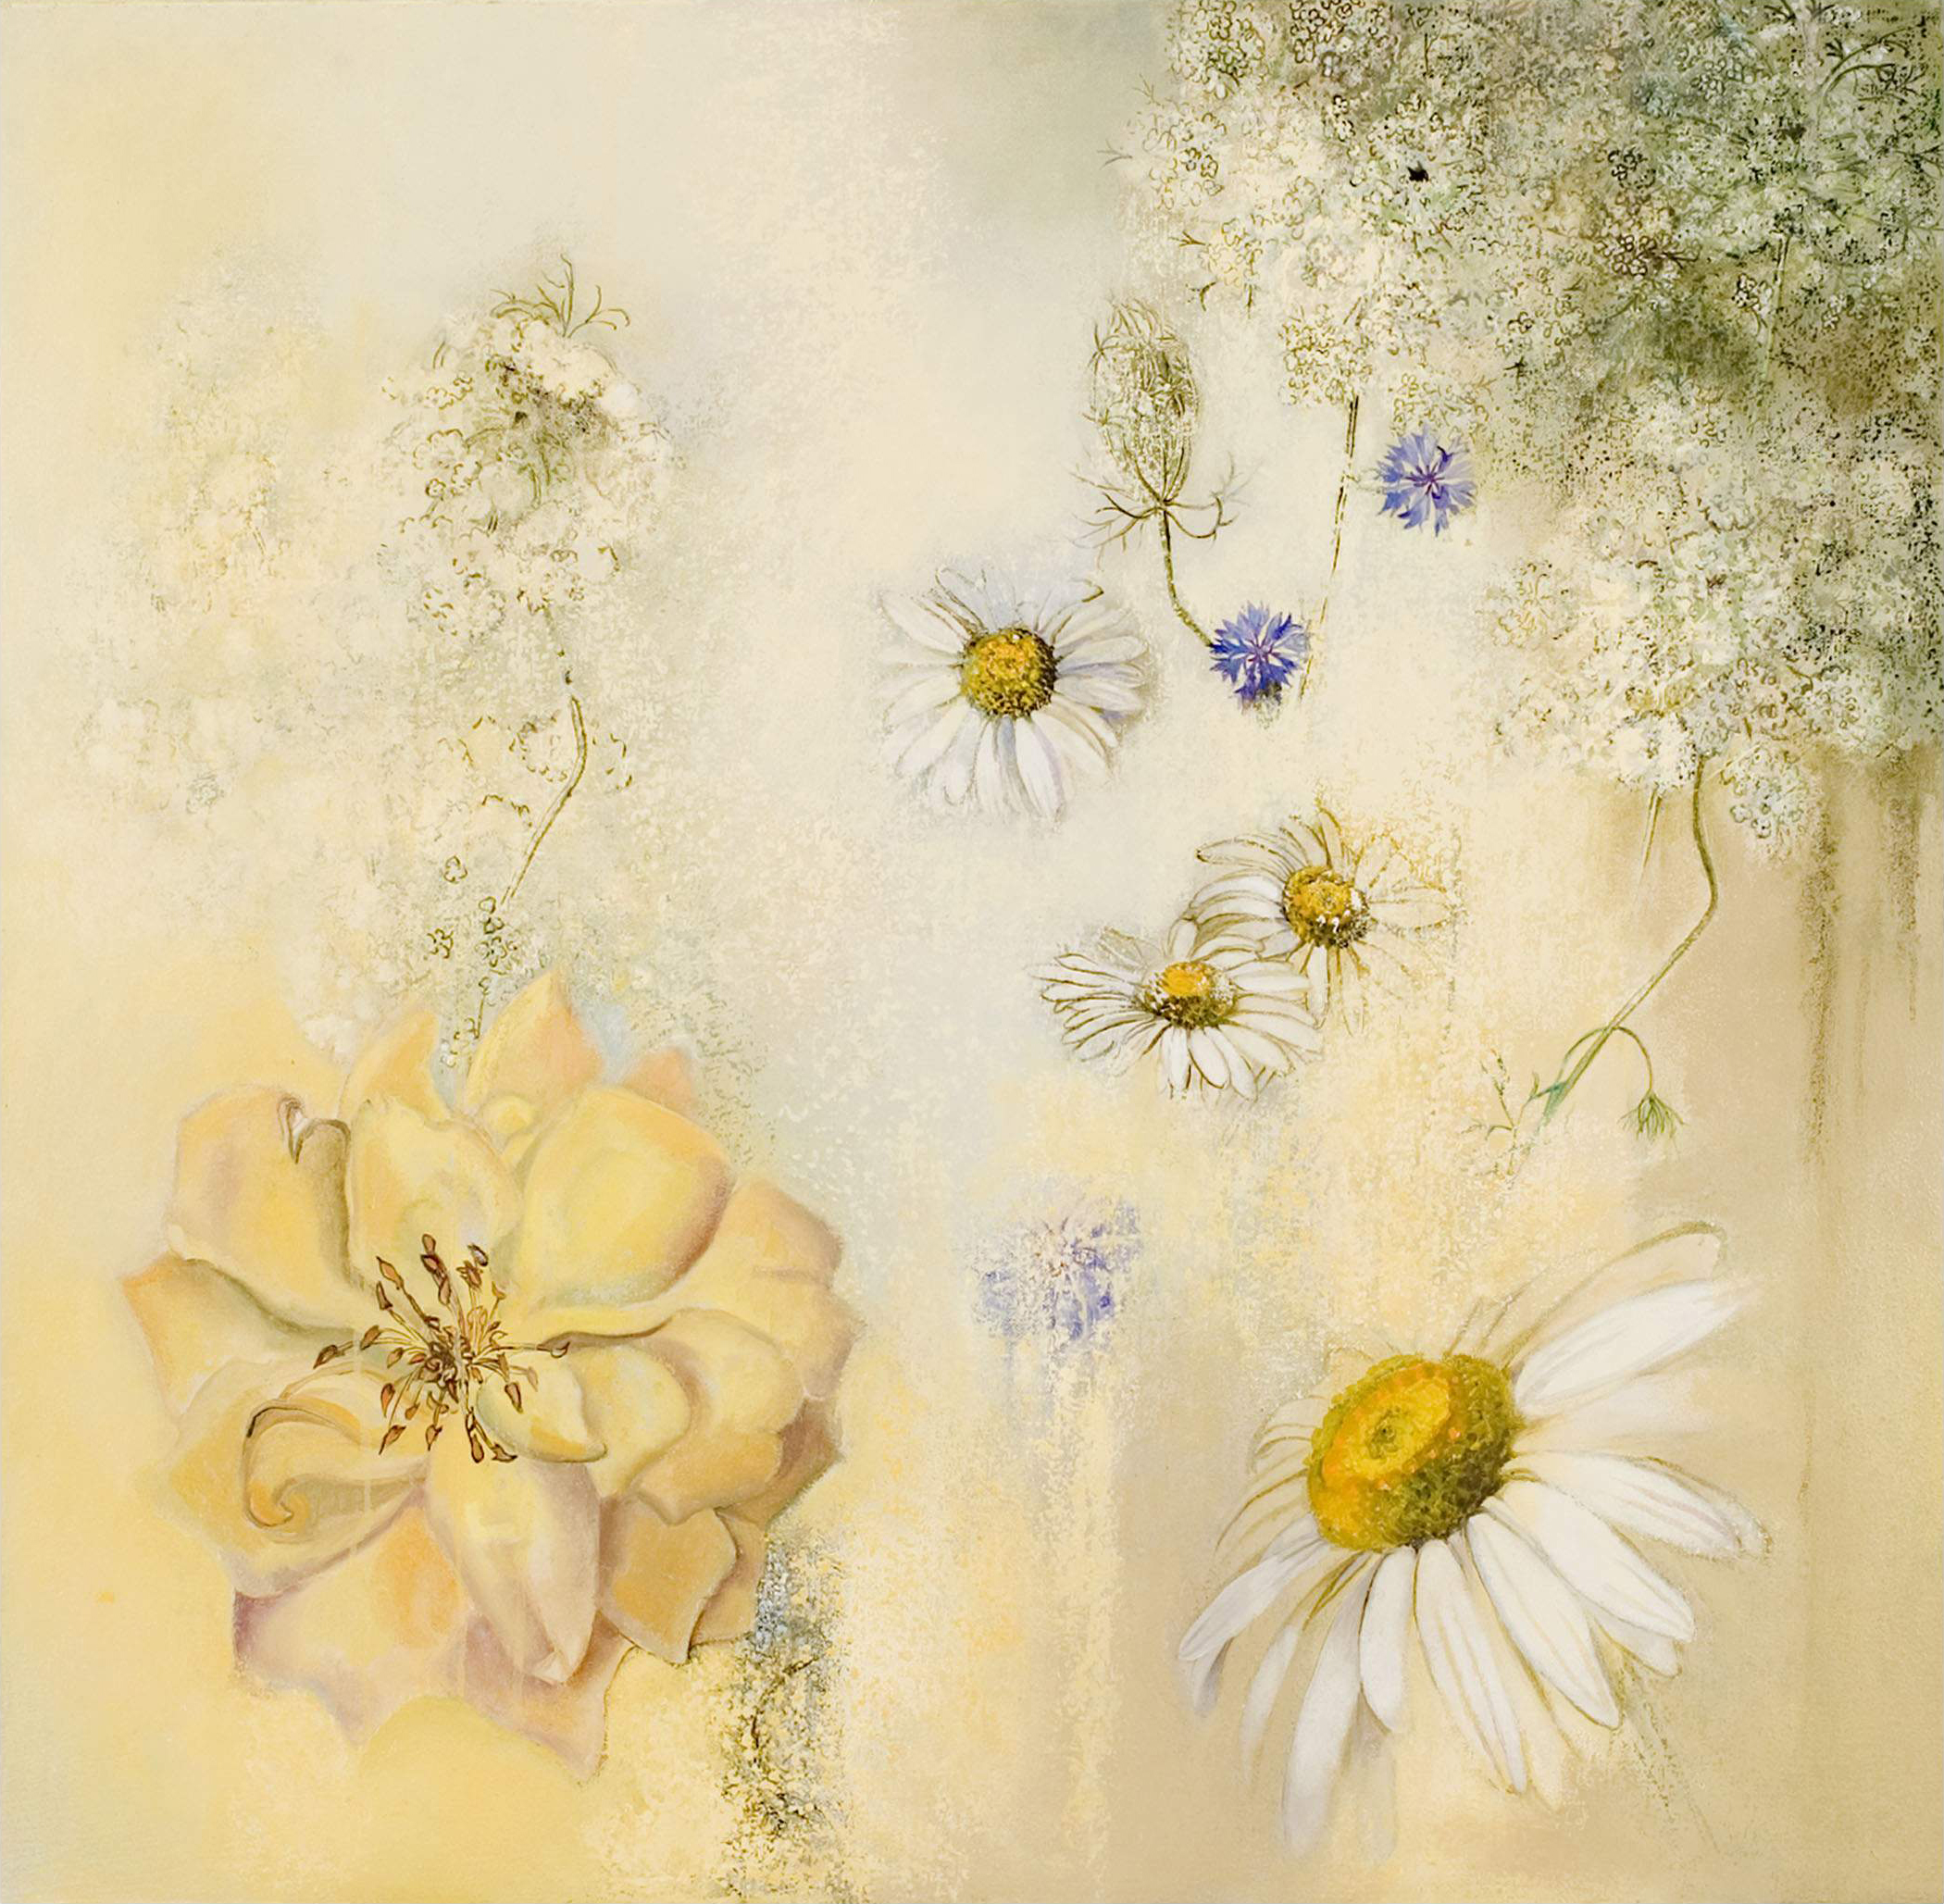 Roses and Queen Anne's Lace, oil and oil stick on canvas, 28 x 29 inches, 2007